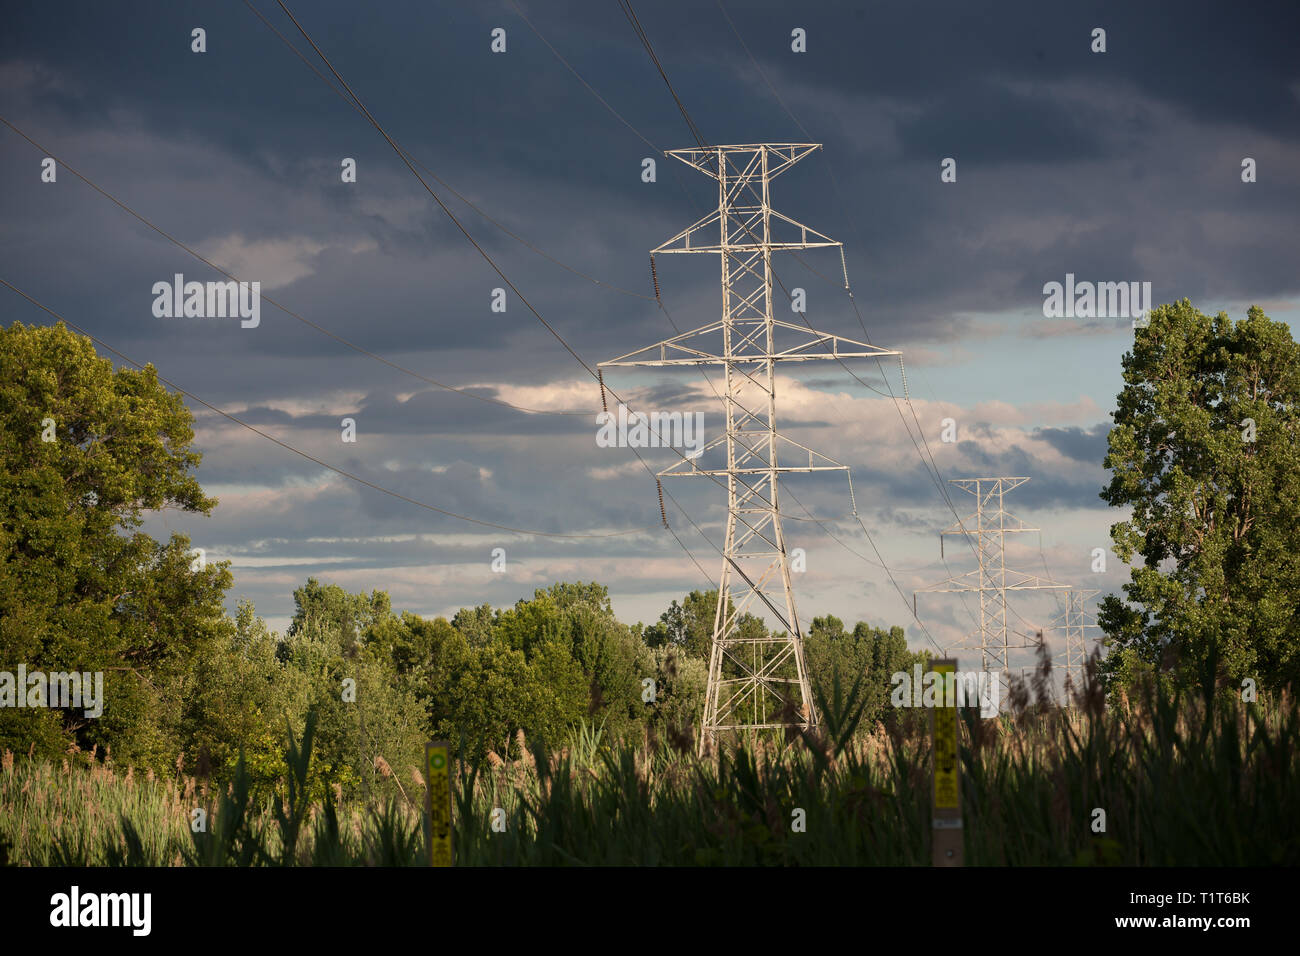 Power Industry Electrical Grid Transmission Lines to Supply Electricity with Tower Wires Stock Photo